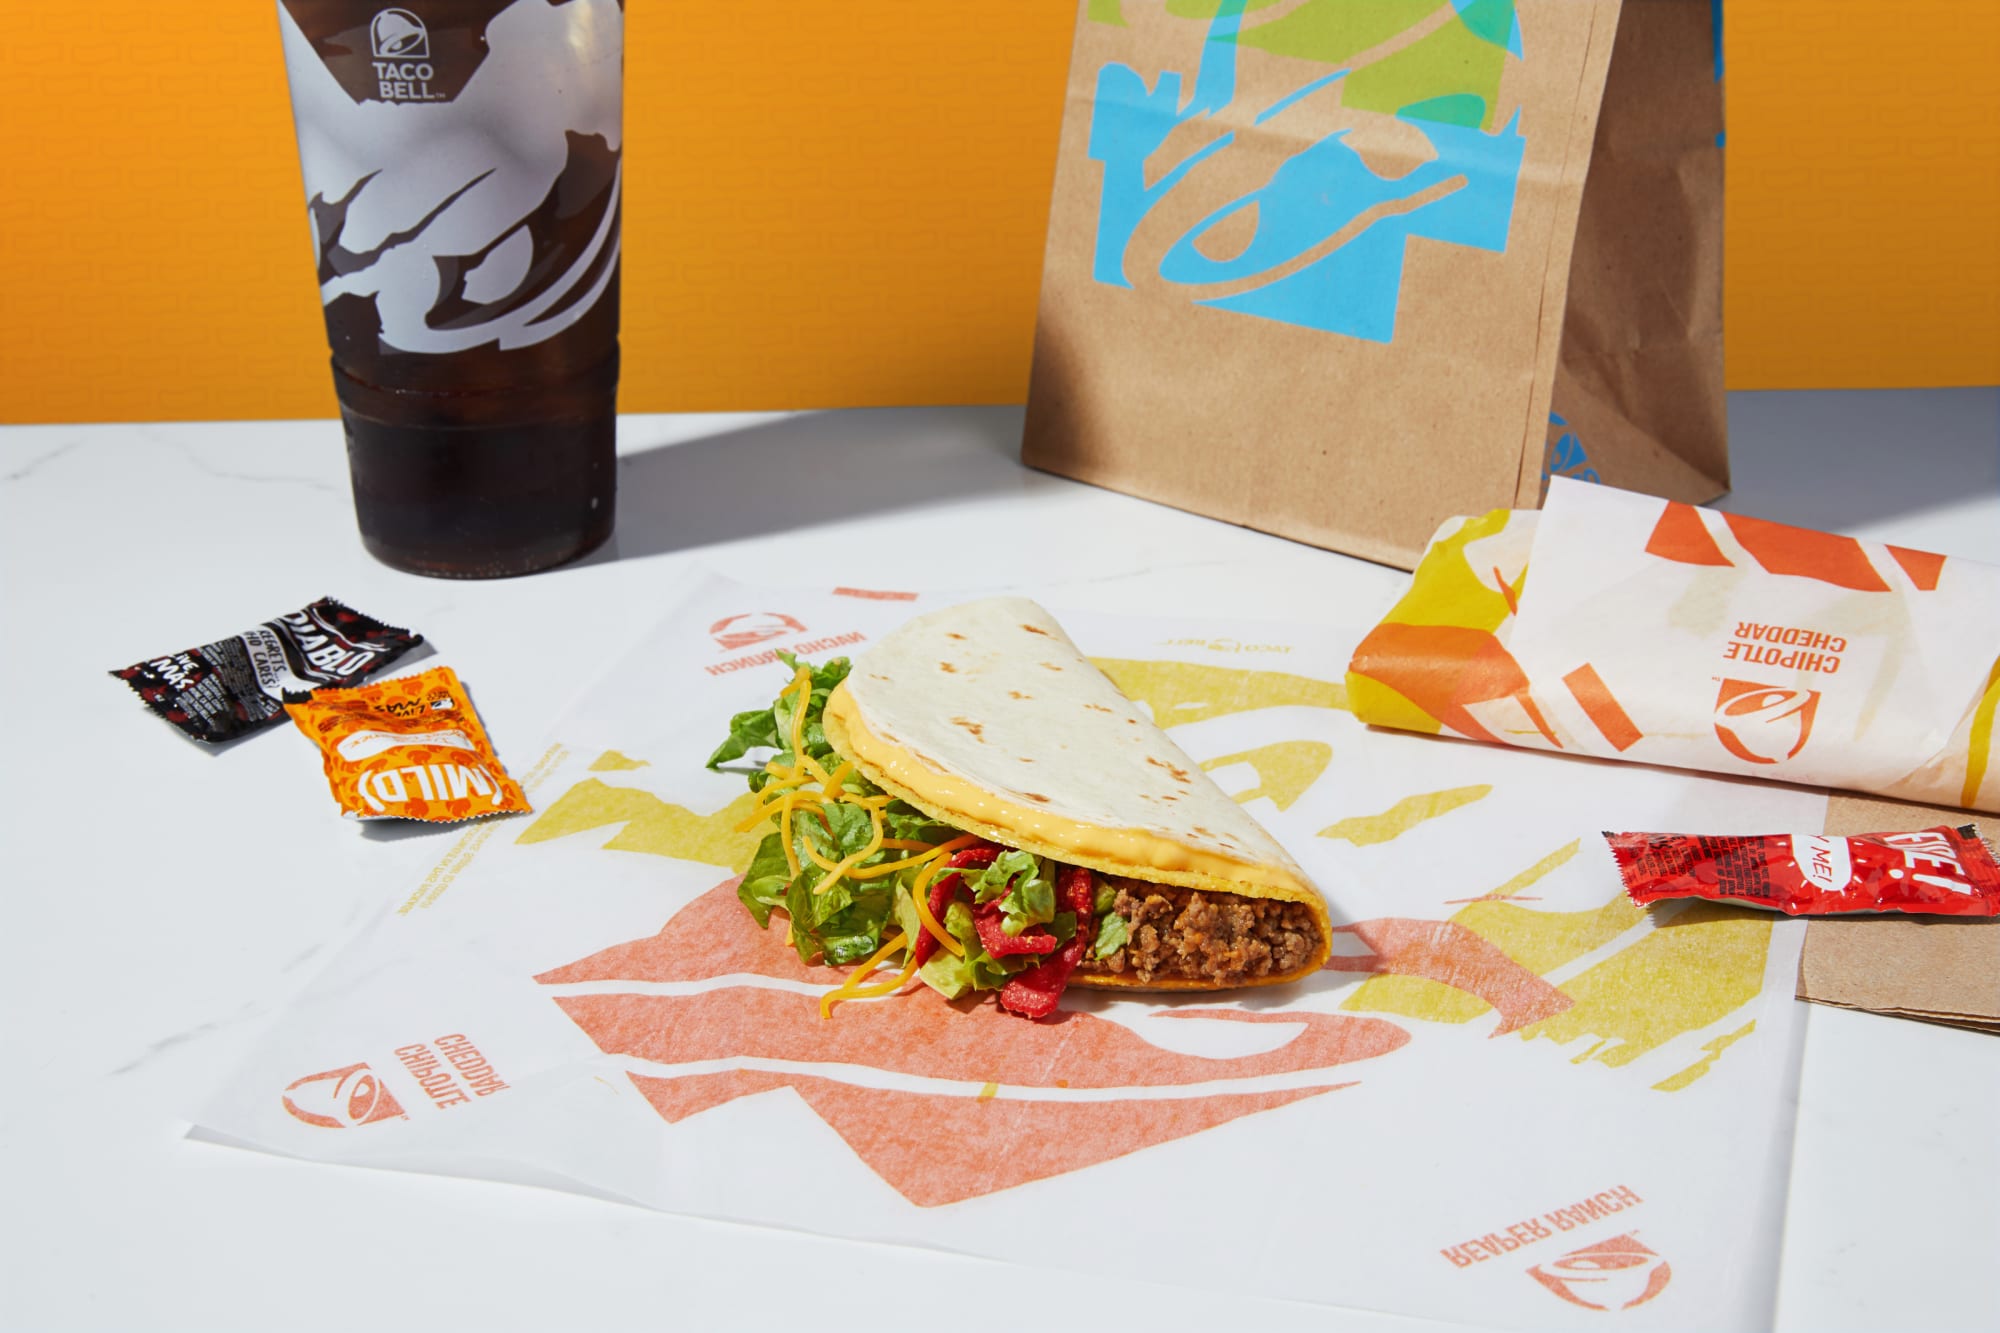 The Taco Bell Cravings boxes are going deluxe in 2023